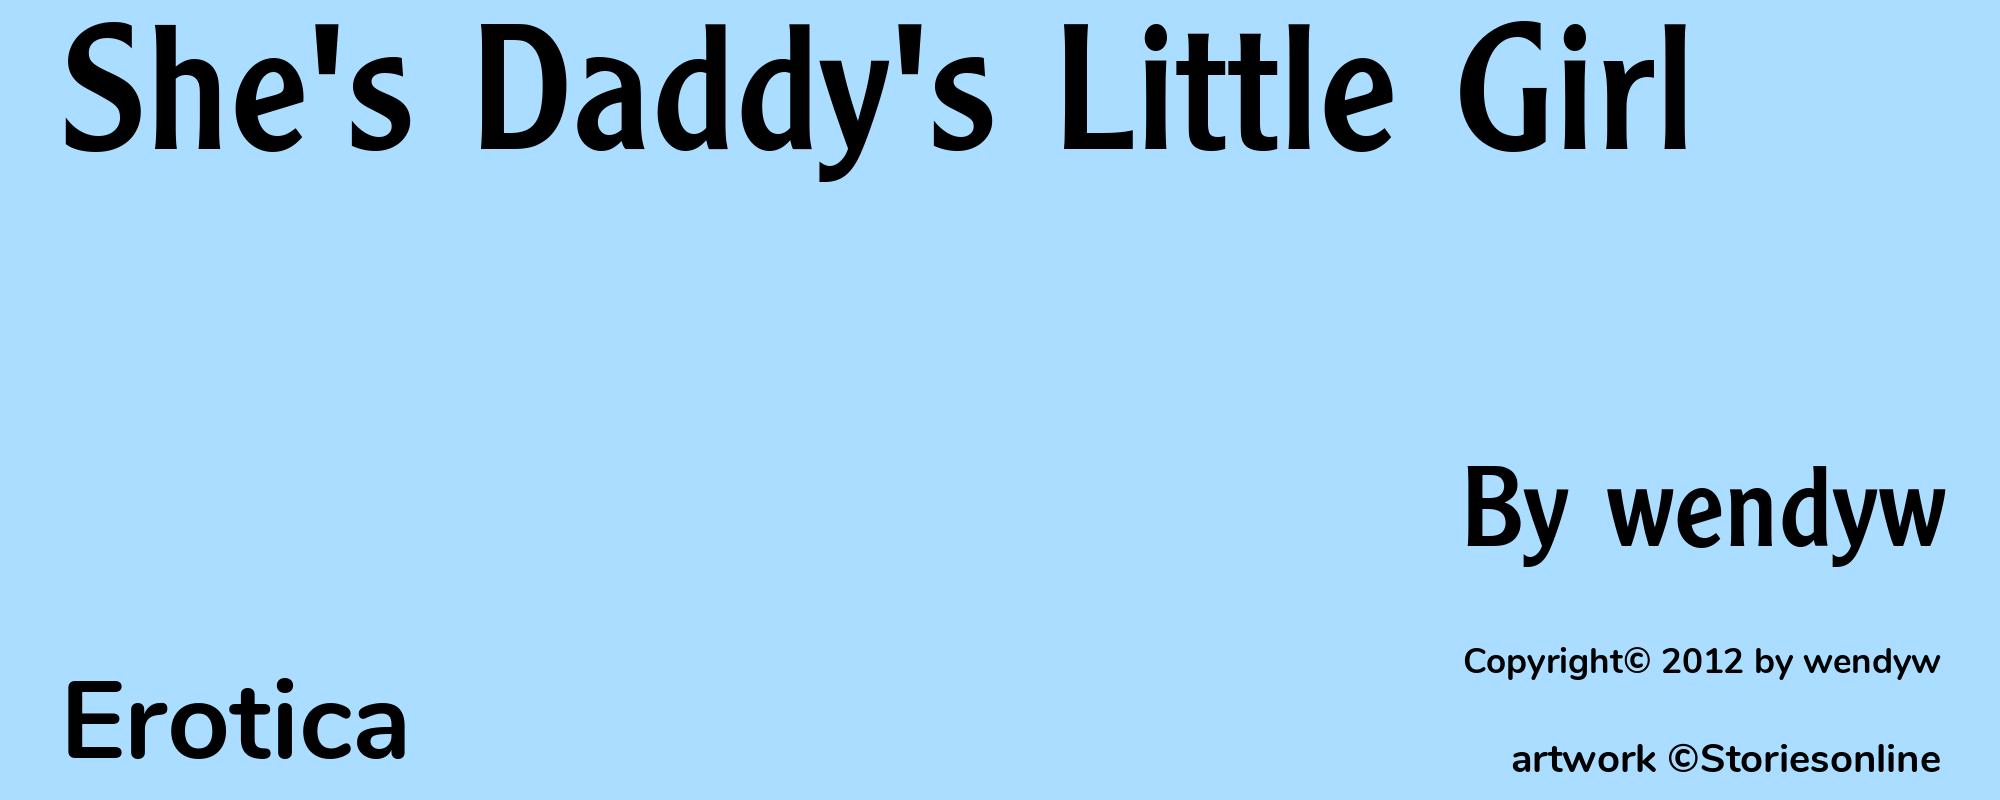 She's Daddy's Little Girl - Cover